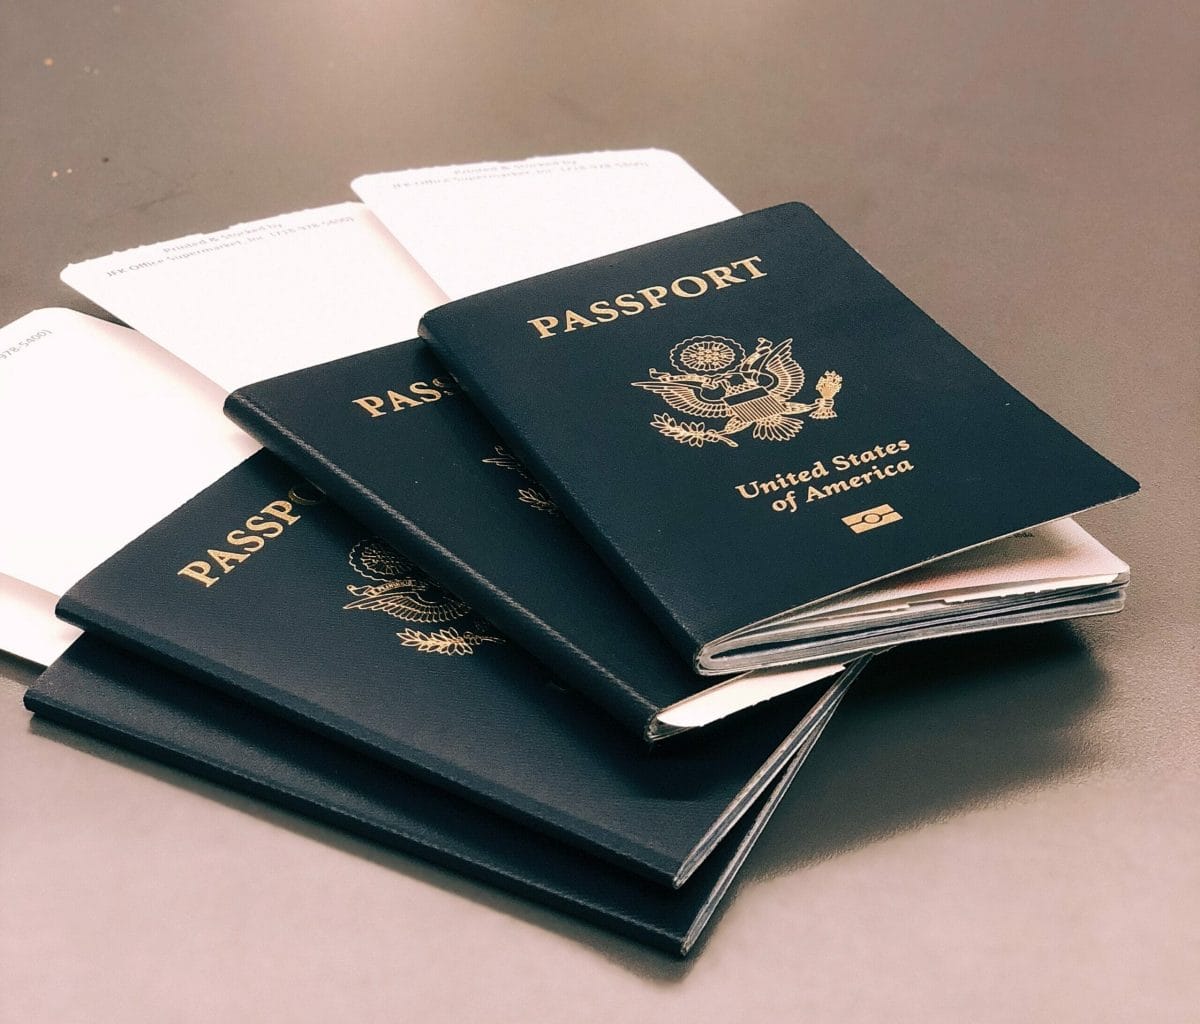 Four USA passports with boarding passes sticking out the top